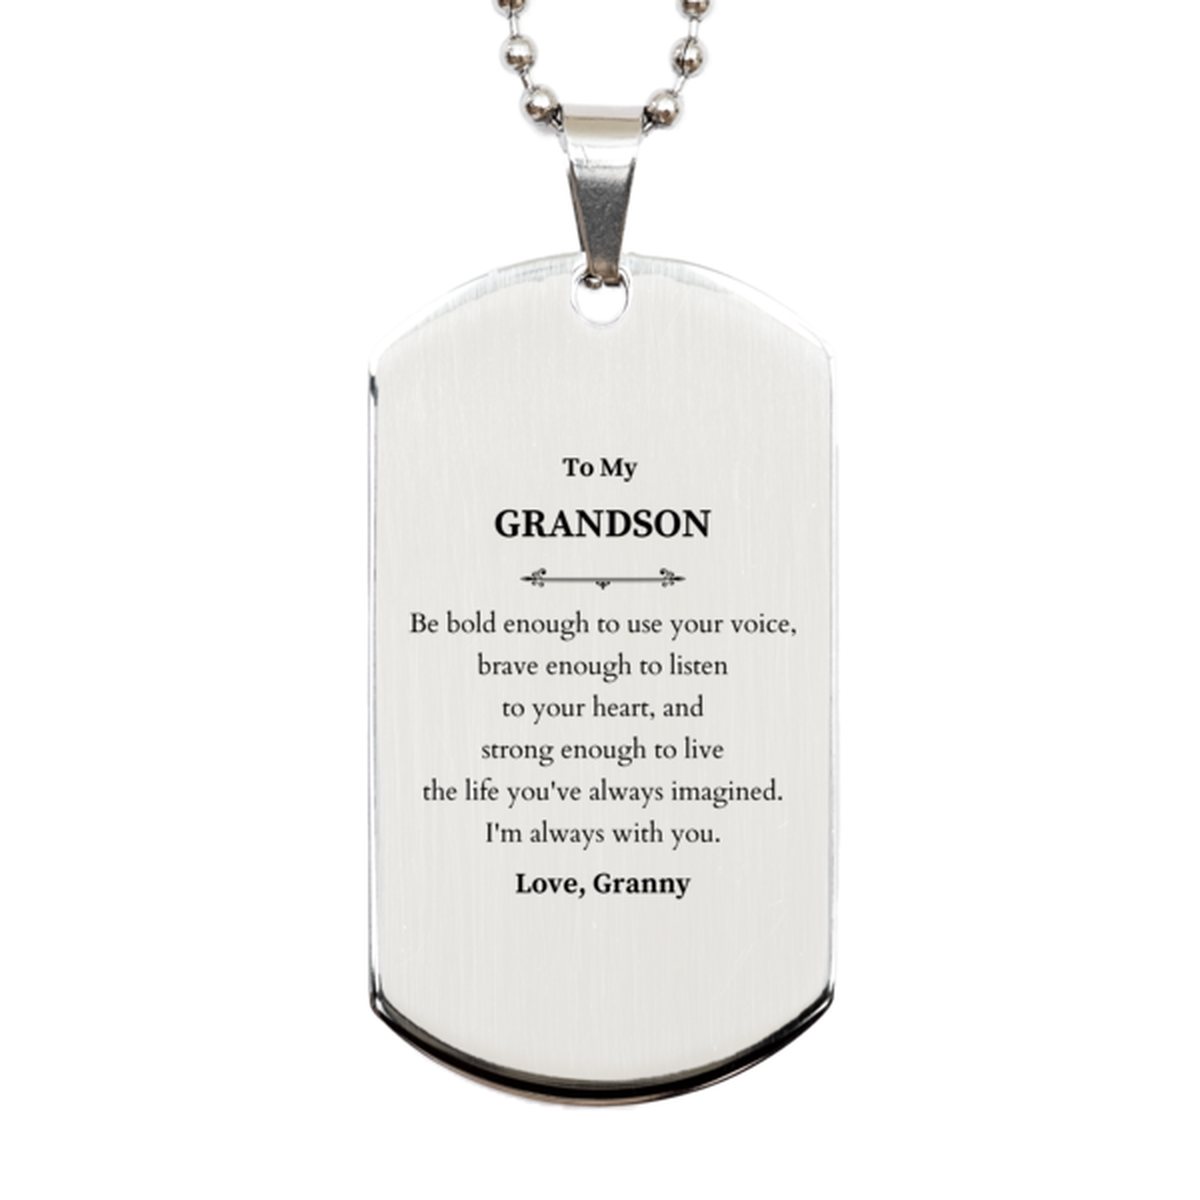 Keepsake Grandson Silver Dog Tag Gift Idea Graduation Christmas Birthday Grandson from Granny, Grandson Be bold enough to use your voice, brave enough to listen to your heart. Love, Granny